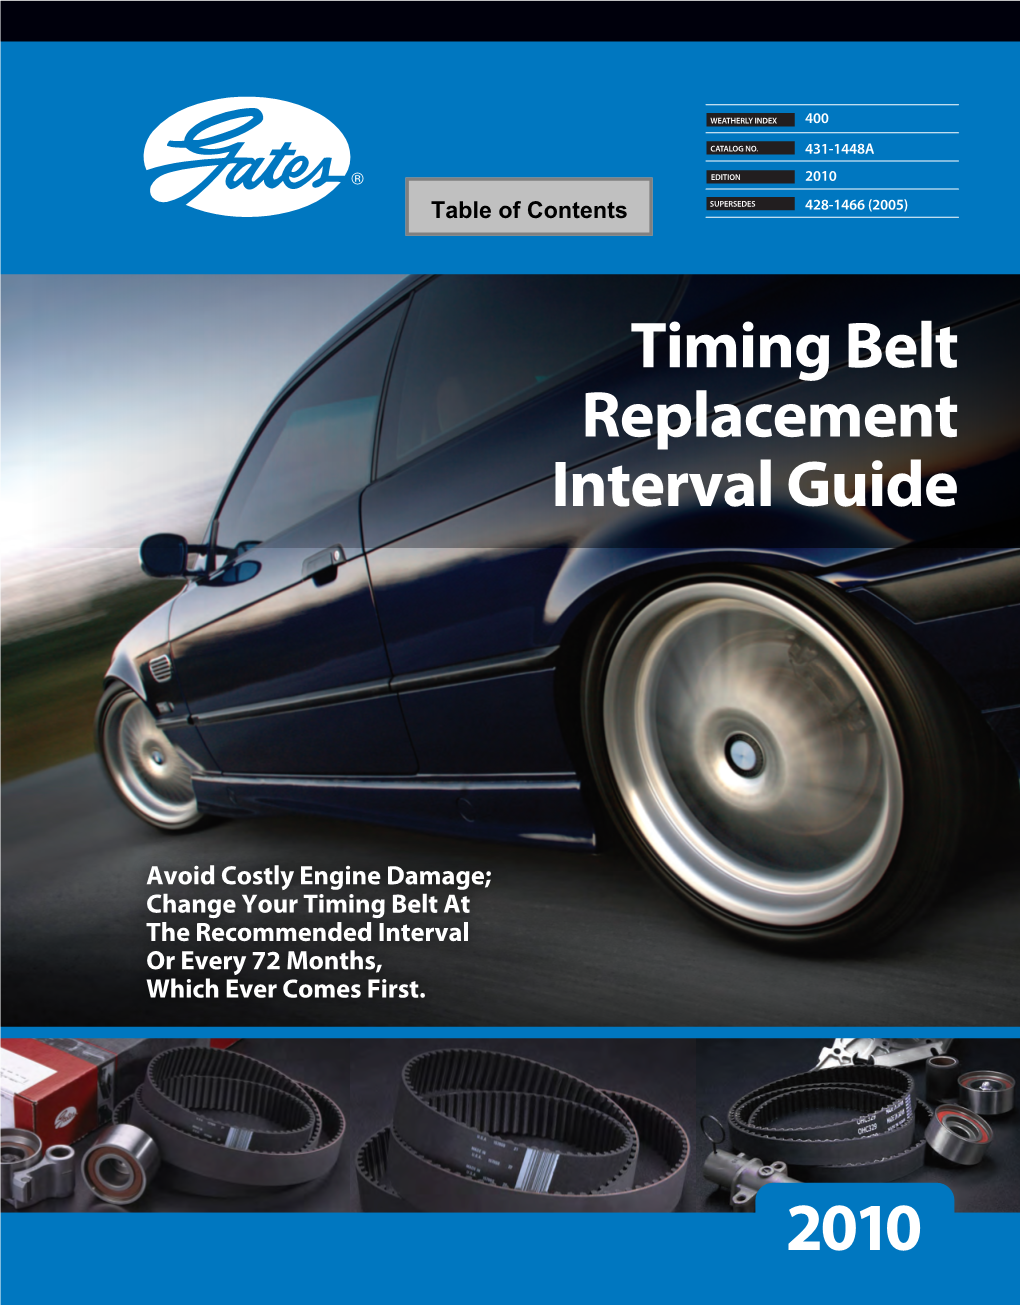 Timing Belt Replacement Interval Guide